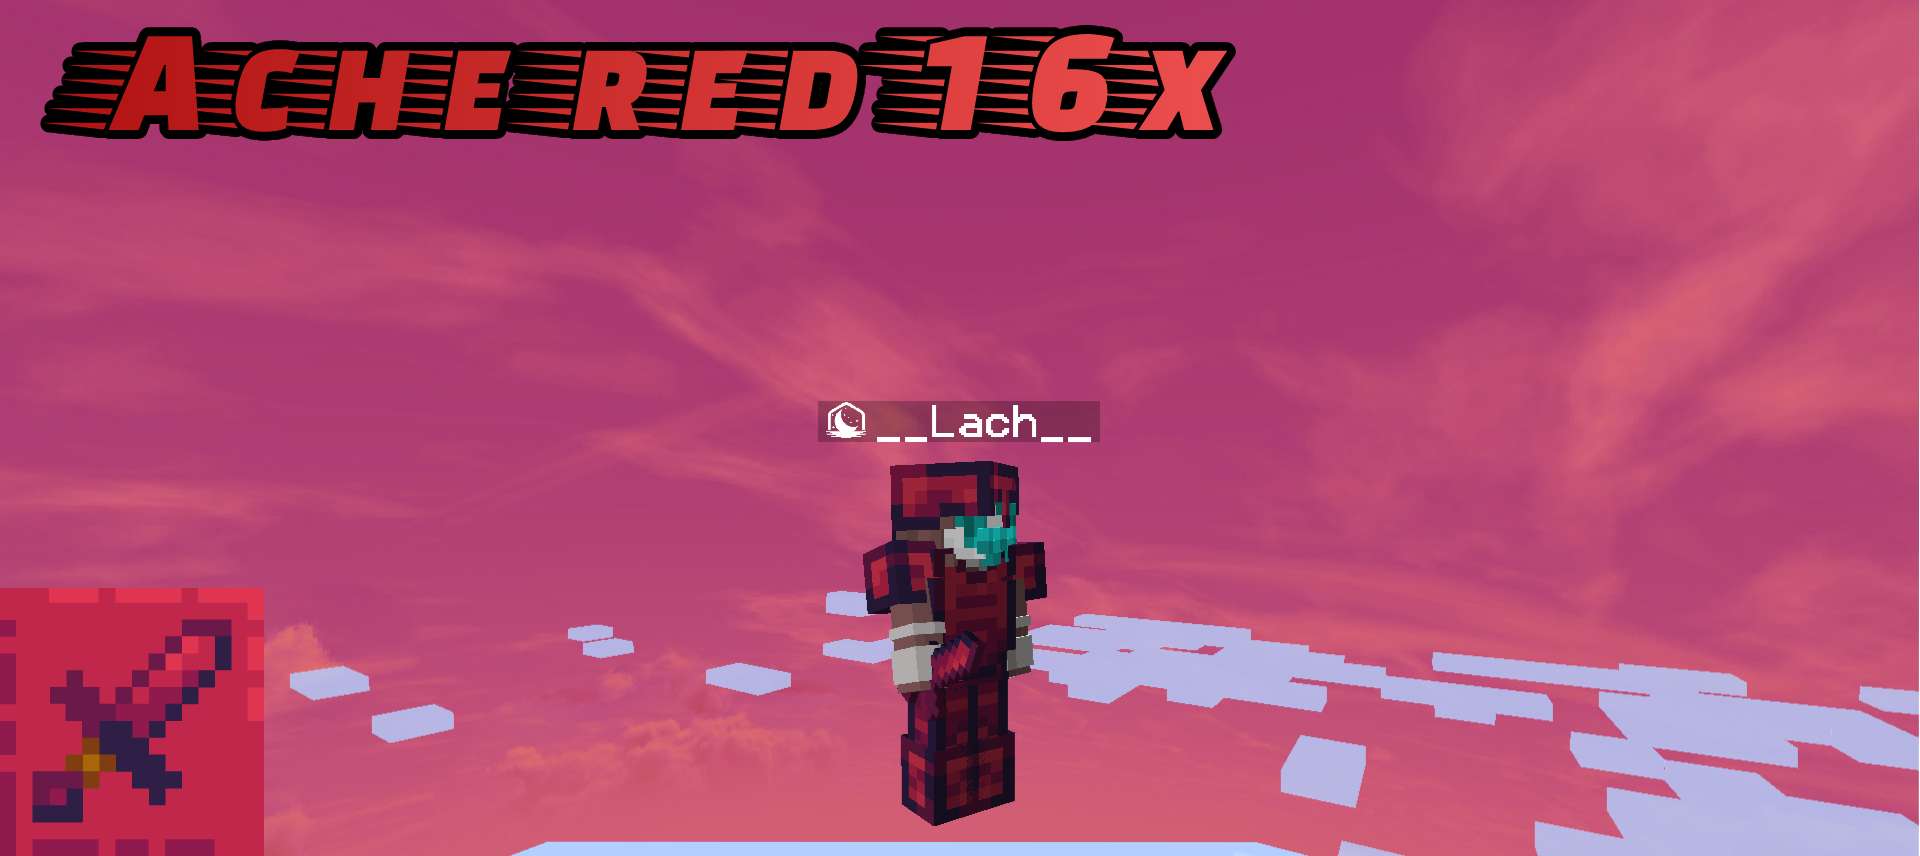 ache red 16 by lach on PvPRP